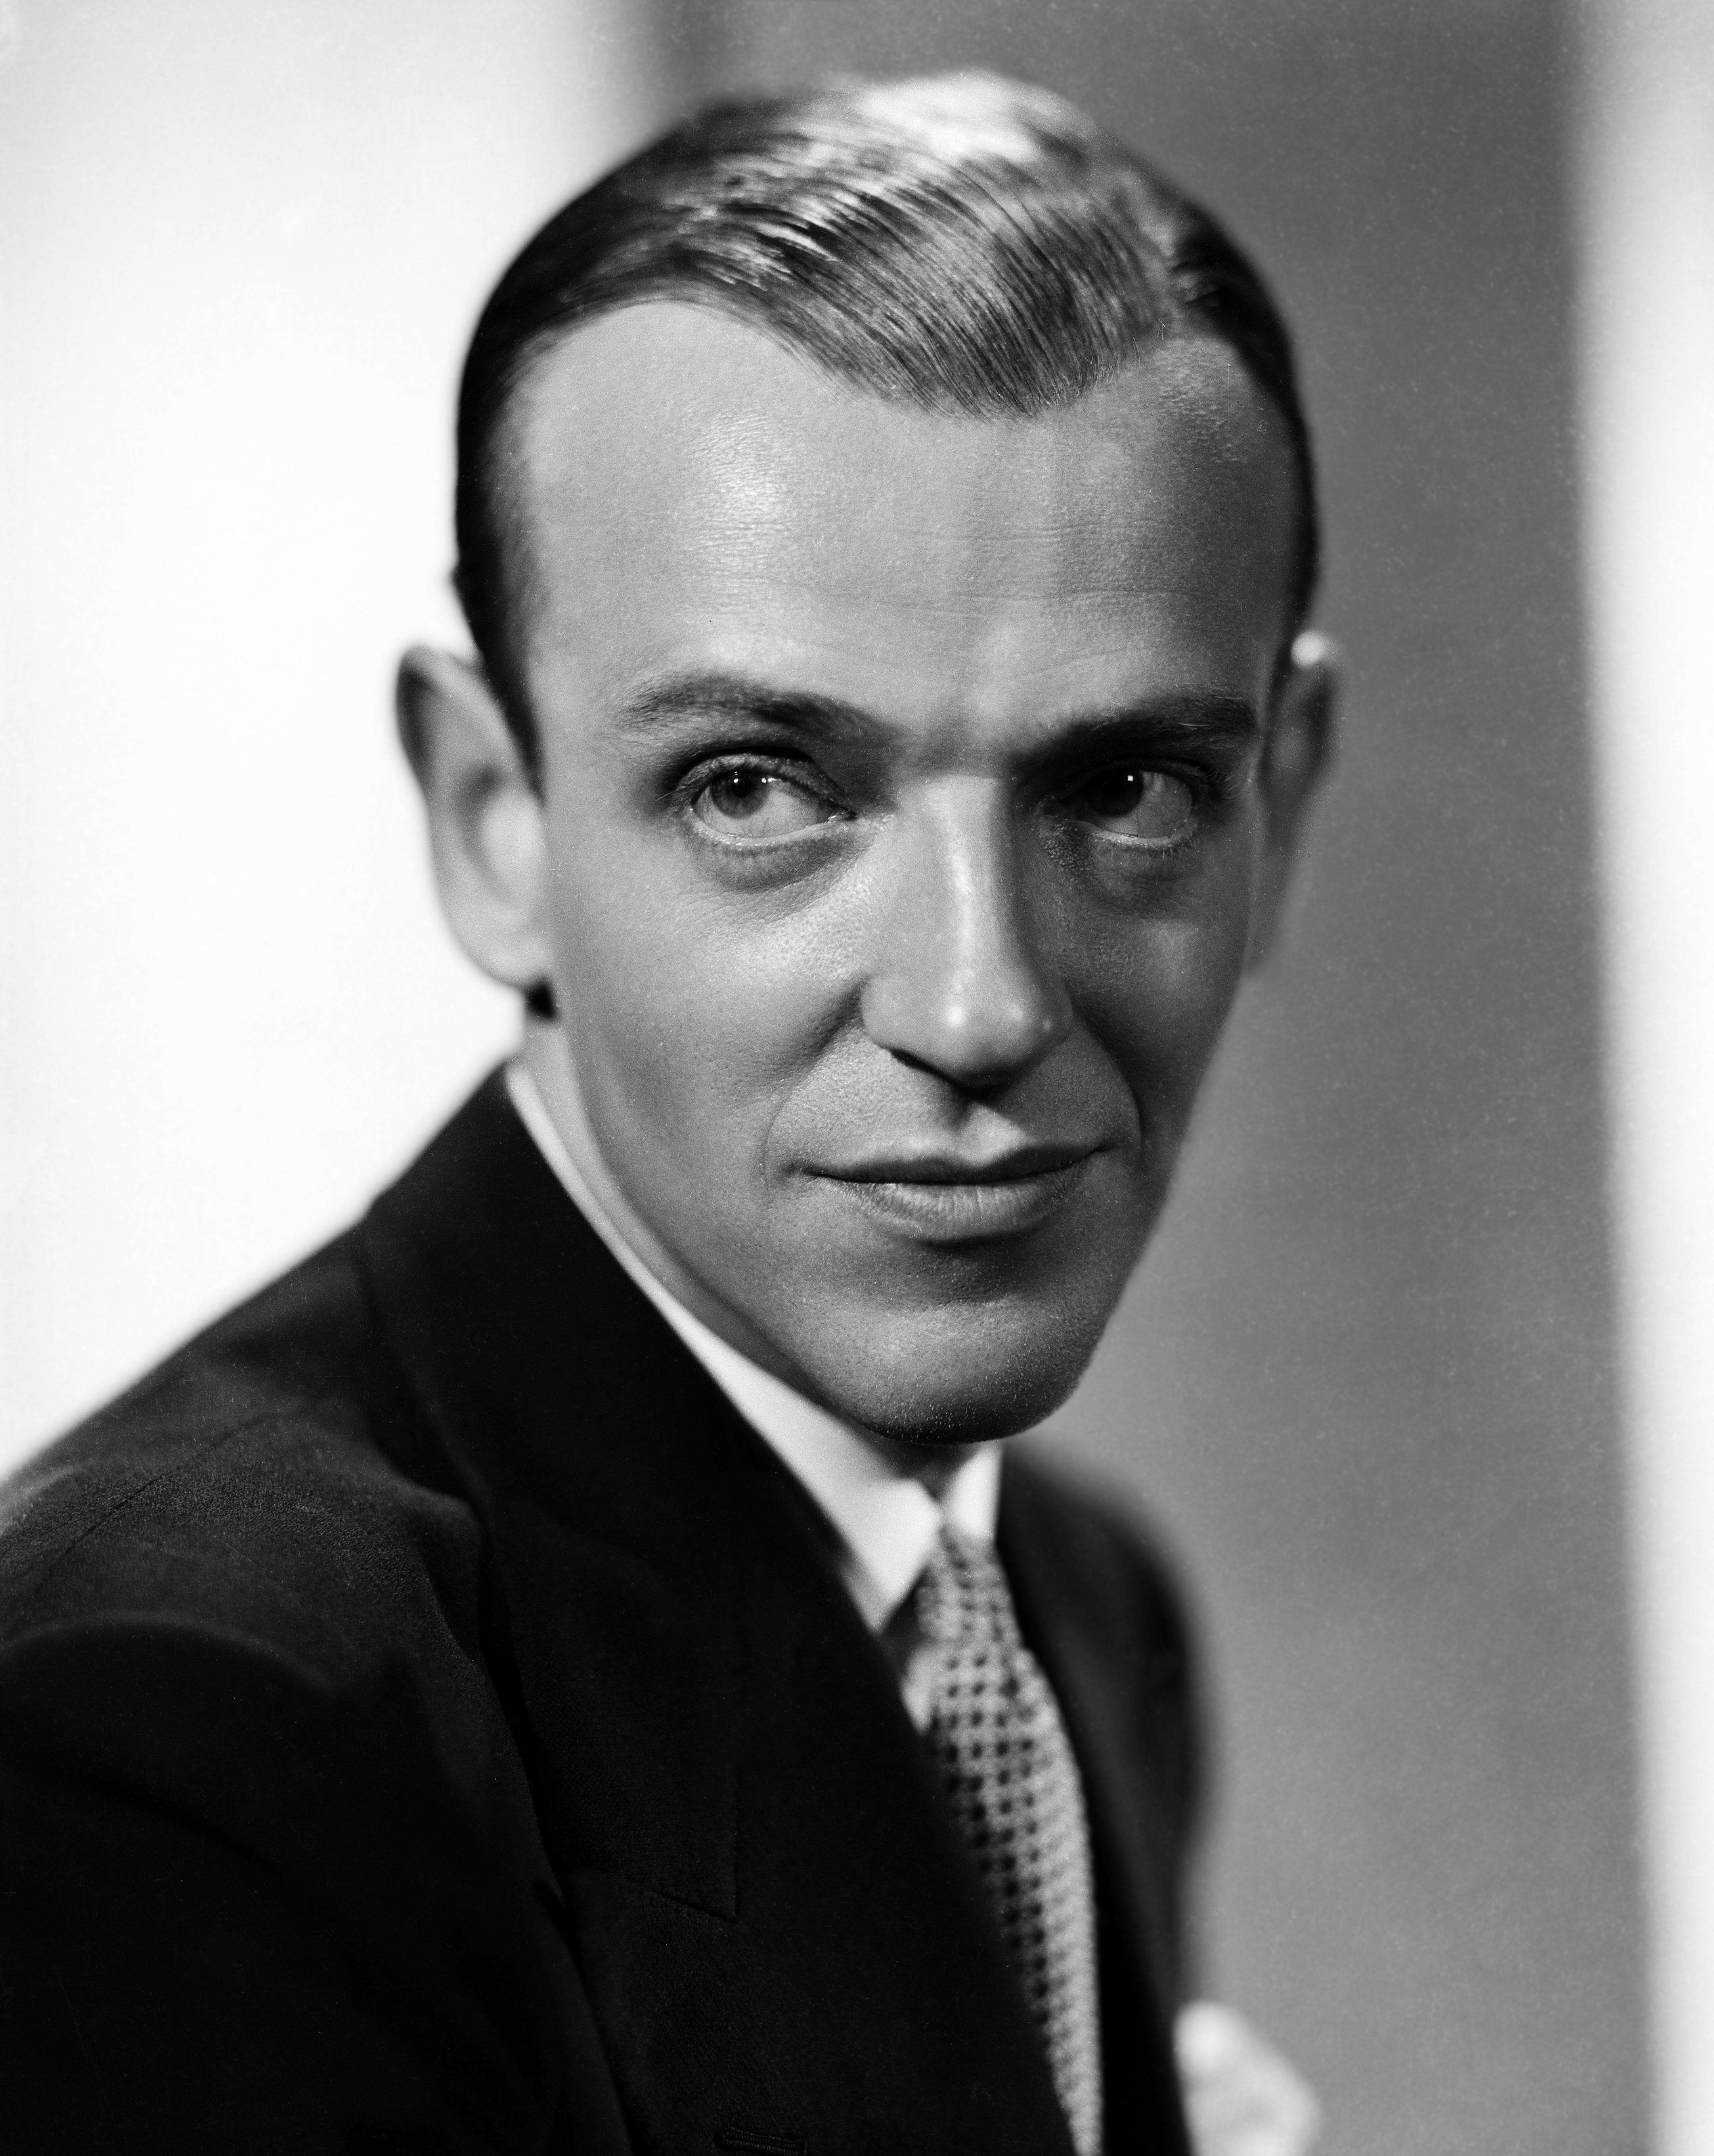 Unknown Black and White Photograph – Fred Astaire: Handsome Headshot Movie Star News Fine Art Print